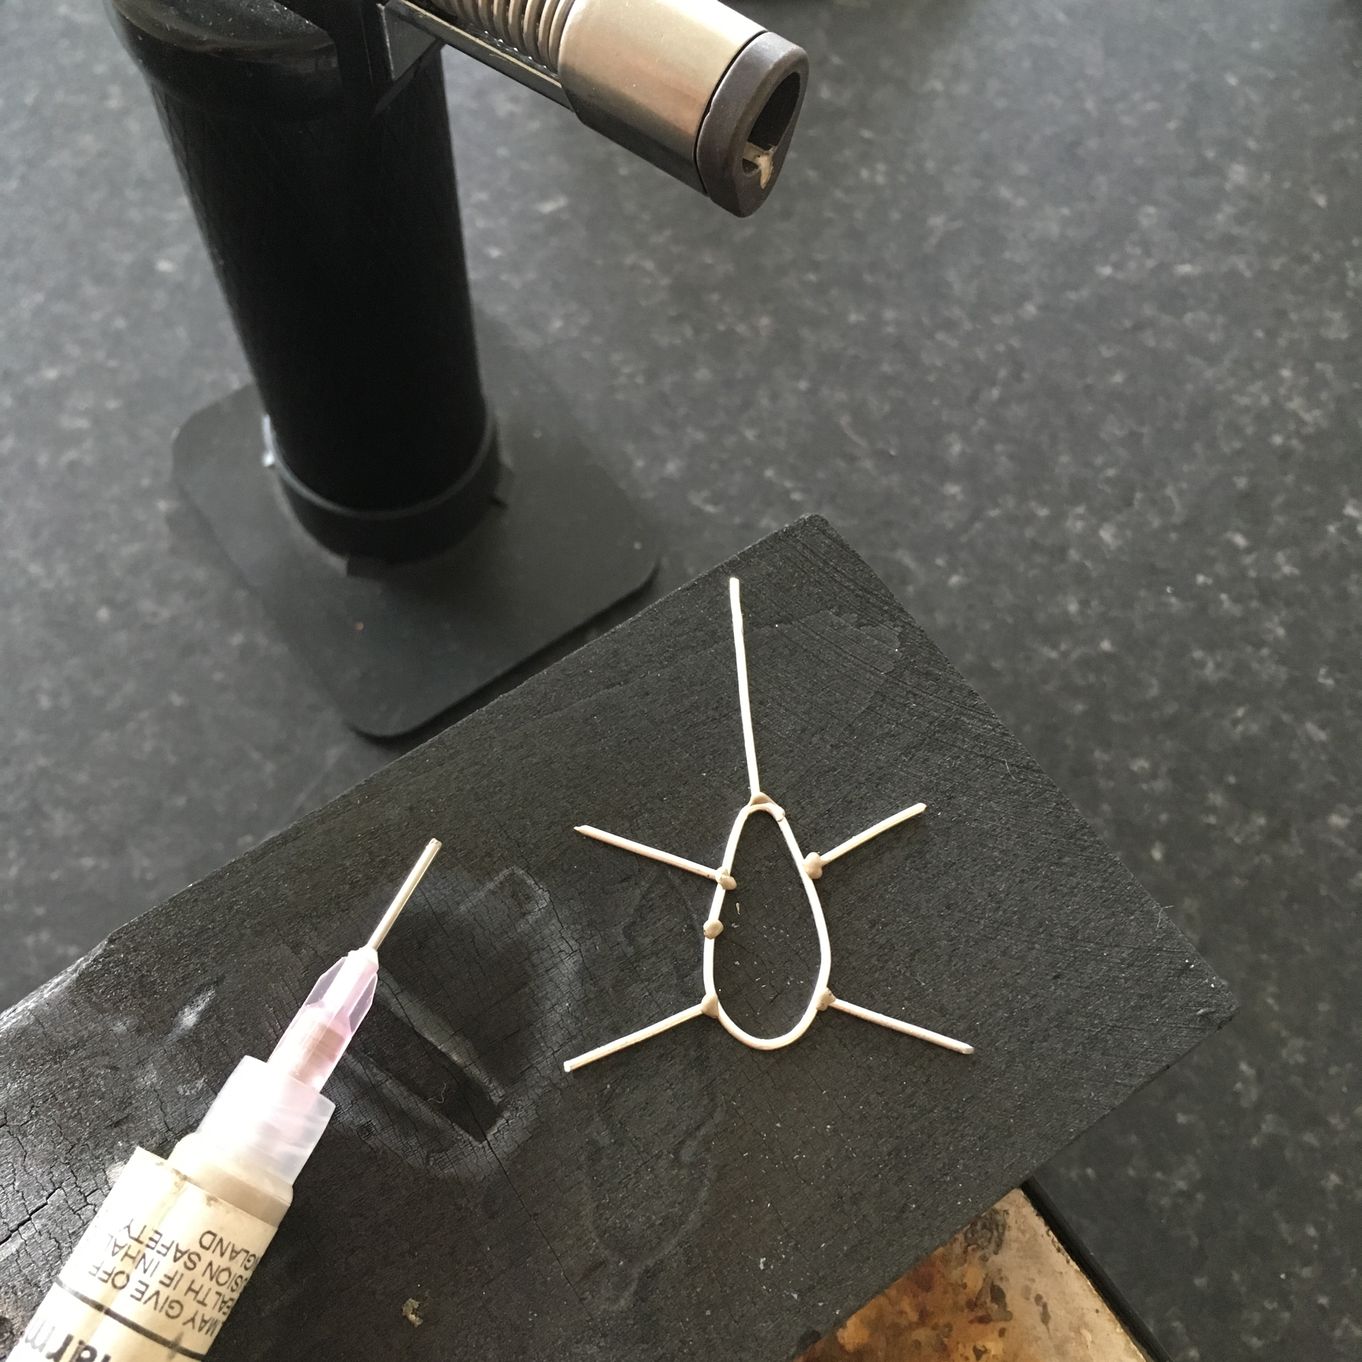 Metalsmithing and Soldering General Advice